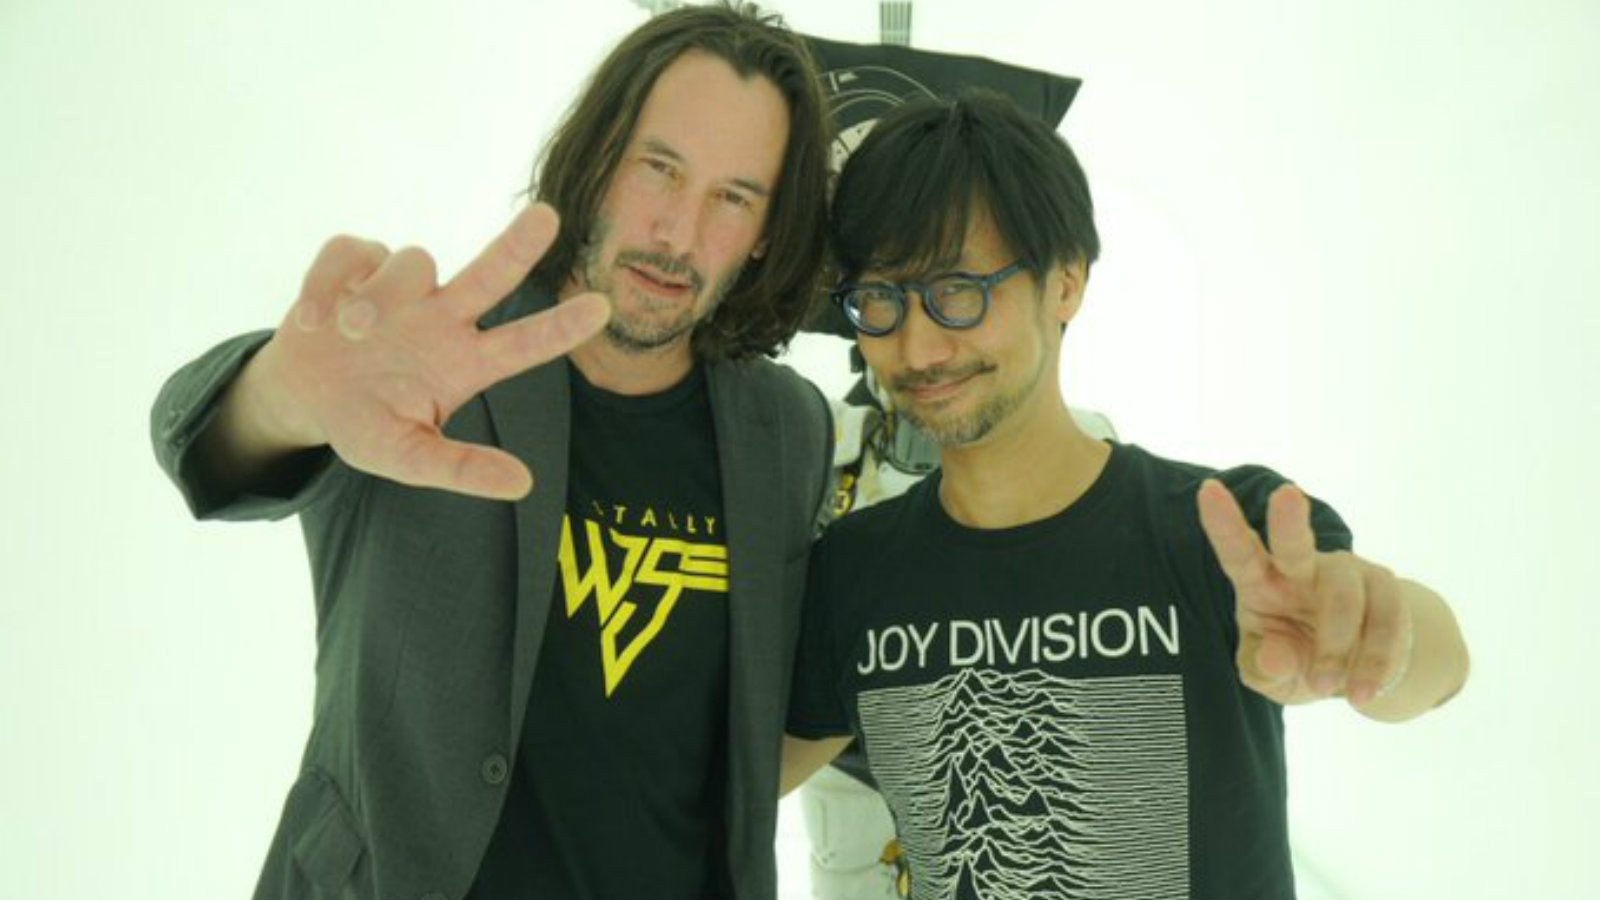 Holy sh*t Hideo what are you cooking up?” Hideo Kojima Convinces Fans Keanu  Reeves is Joining Another Billion Dollar Franchise After John Wick -  FandomWire